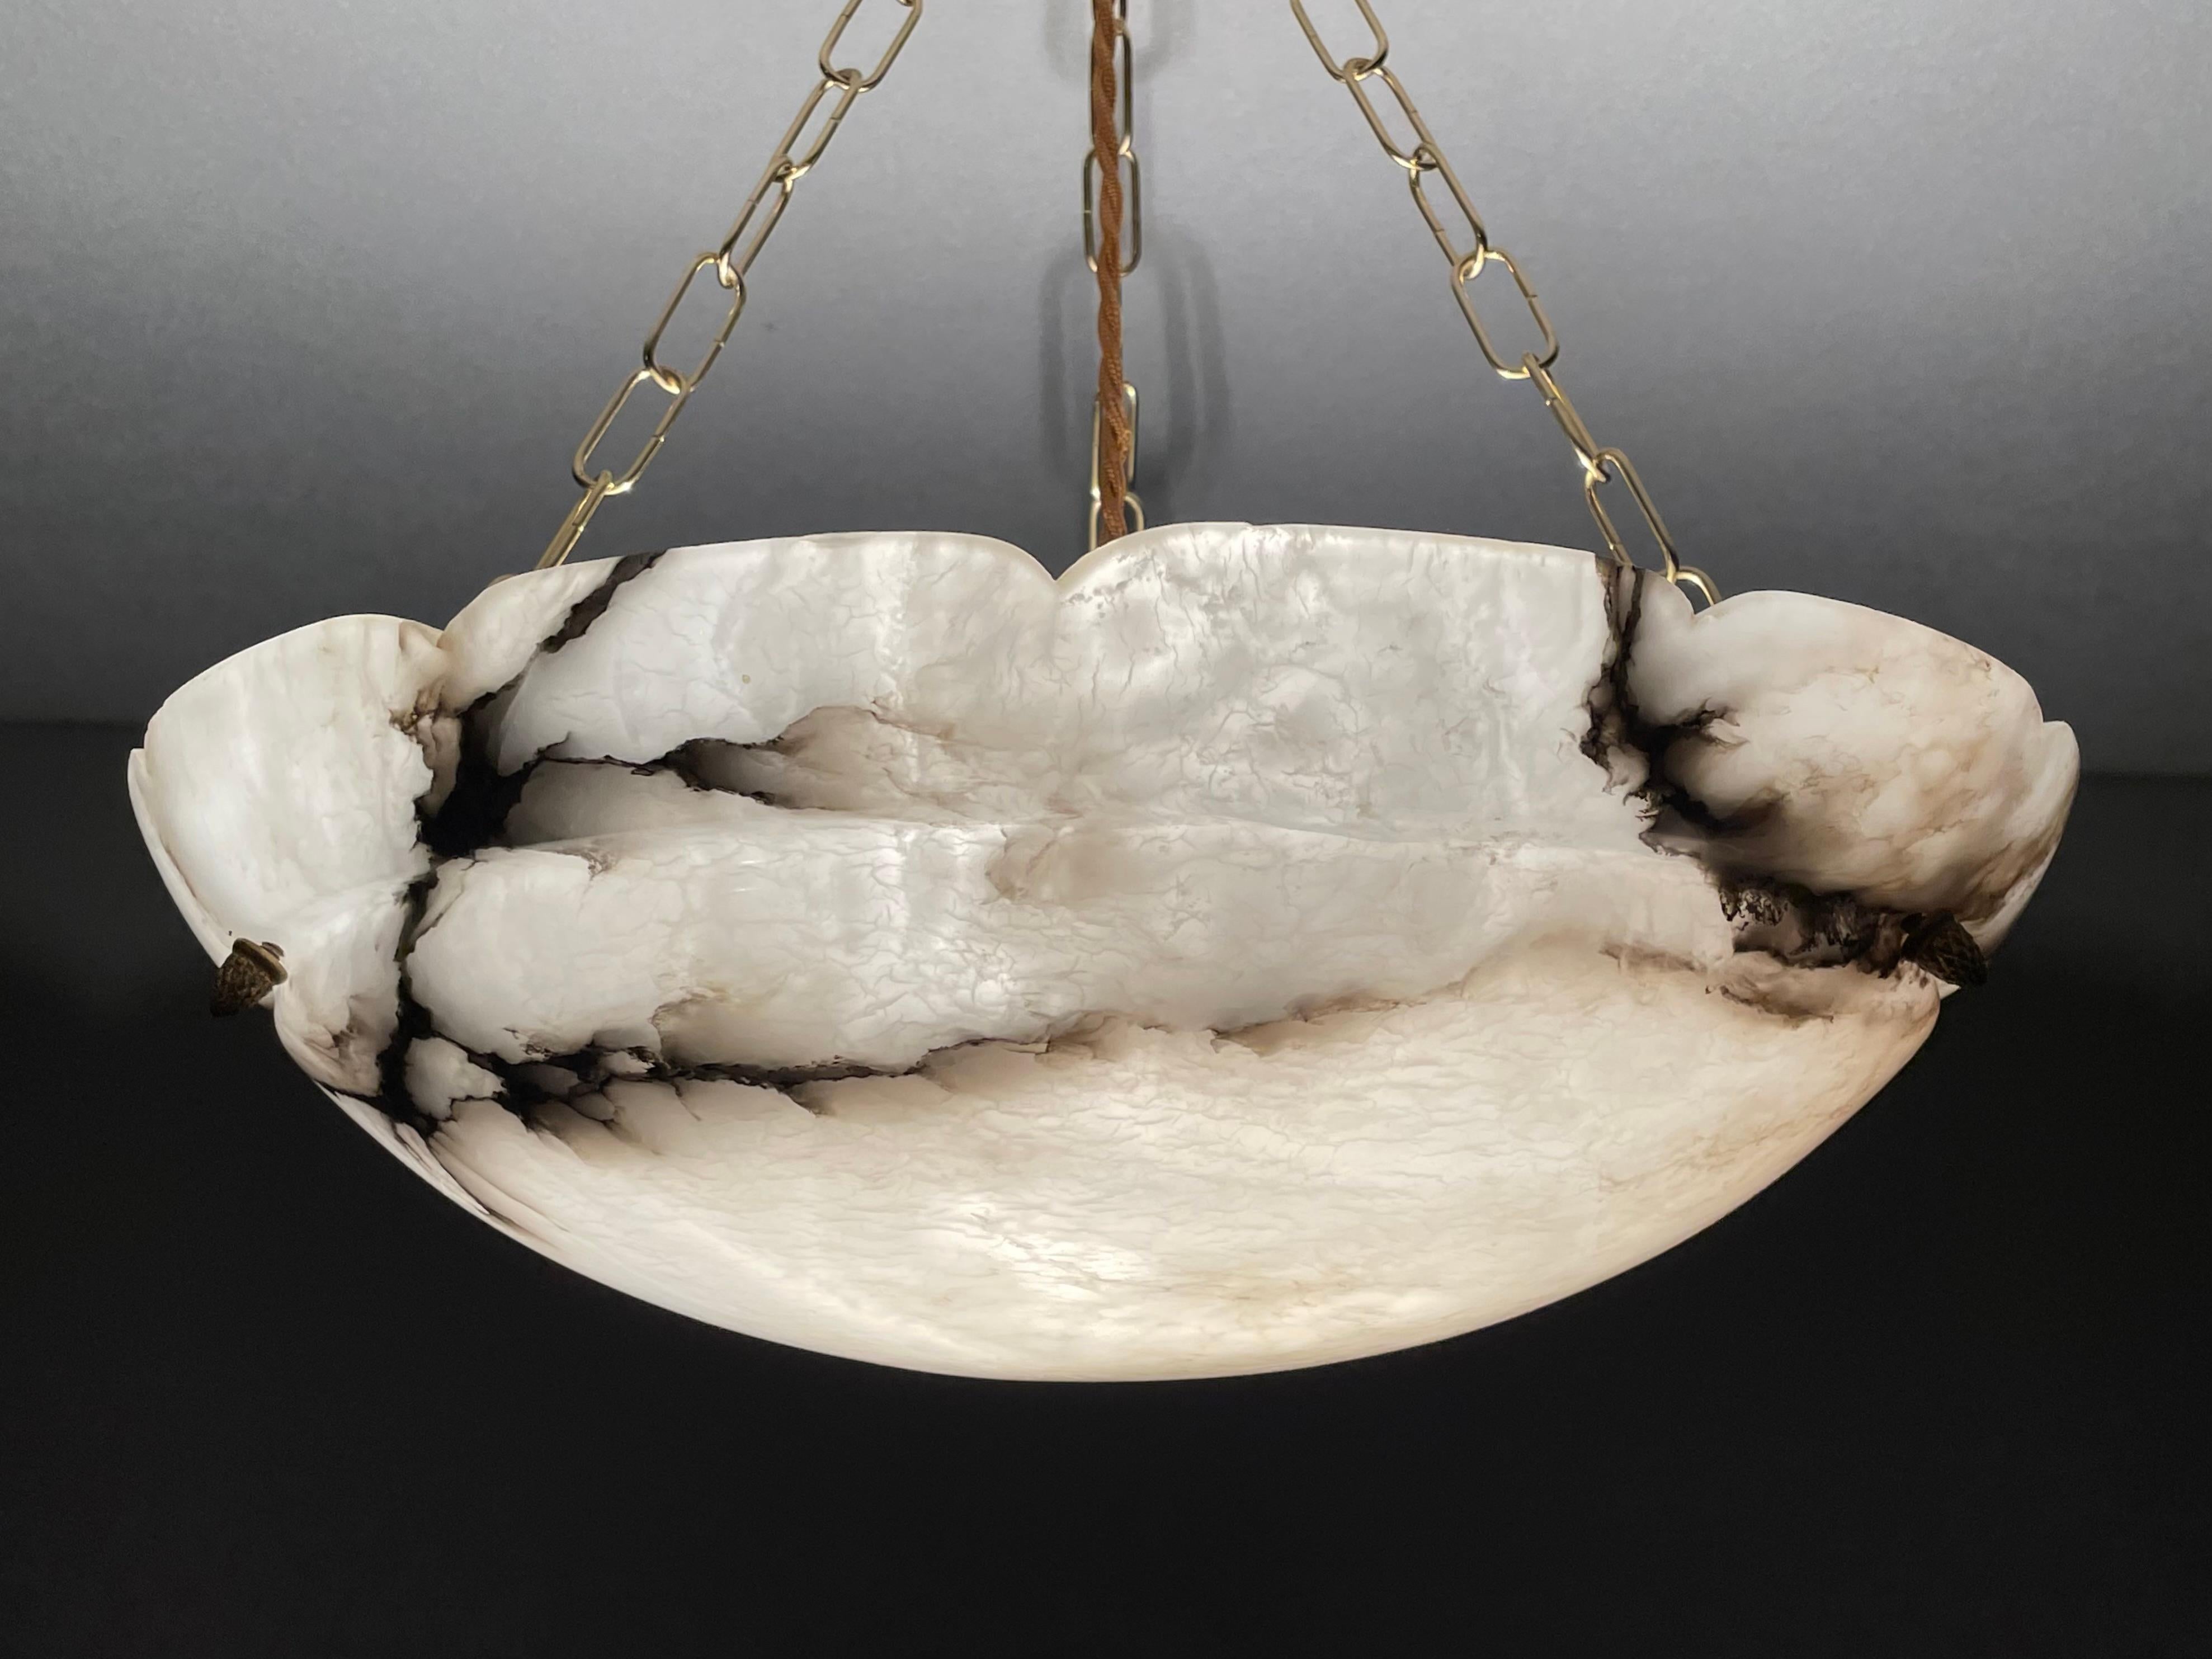 French Art Deco elegance for the collectors and enthousiasts.

If you are looking for a good size, beautiful, timeless and ready to use alabaster chandelier then this striking French specimen from circa 1910-1920 could be gracing your home soon. The